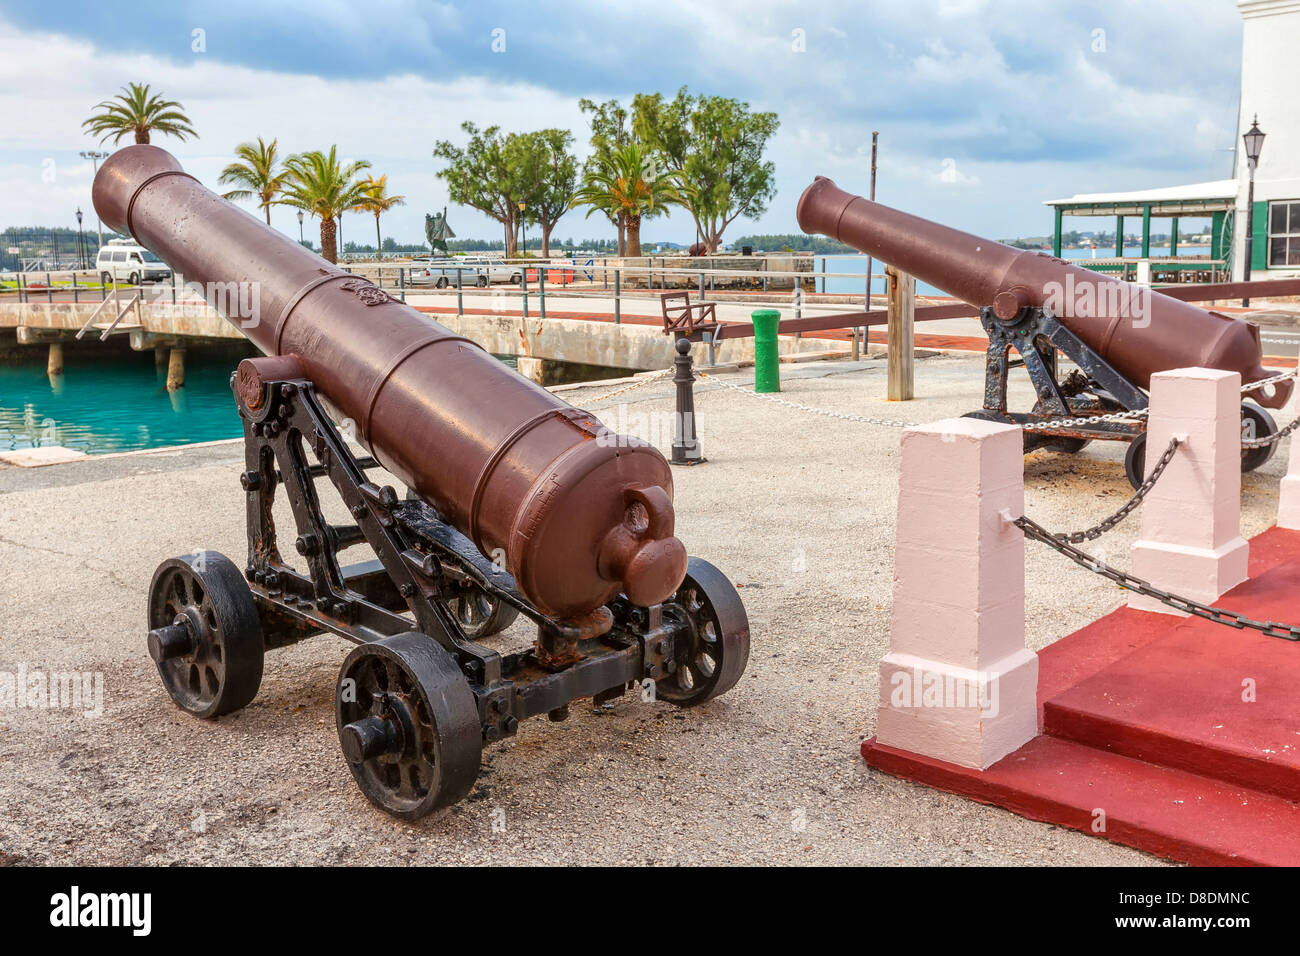 Very old canons sitting on the main square of St. George's, Bermuda Stock Photo